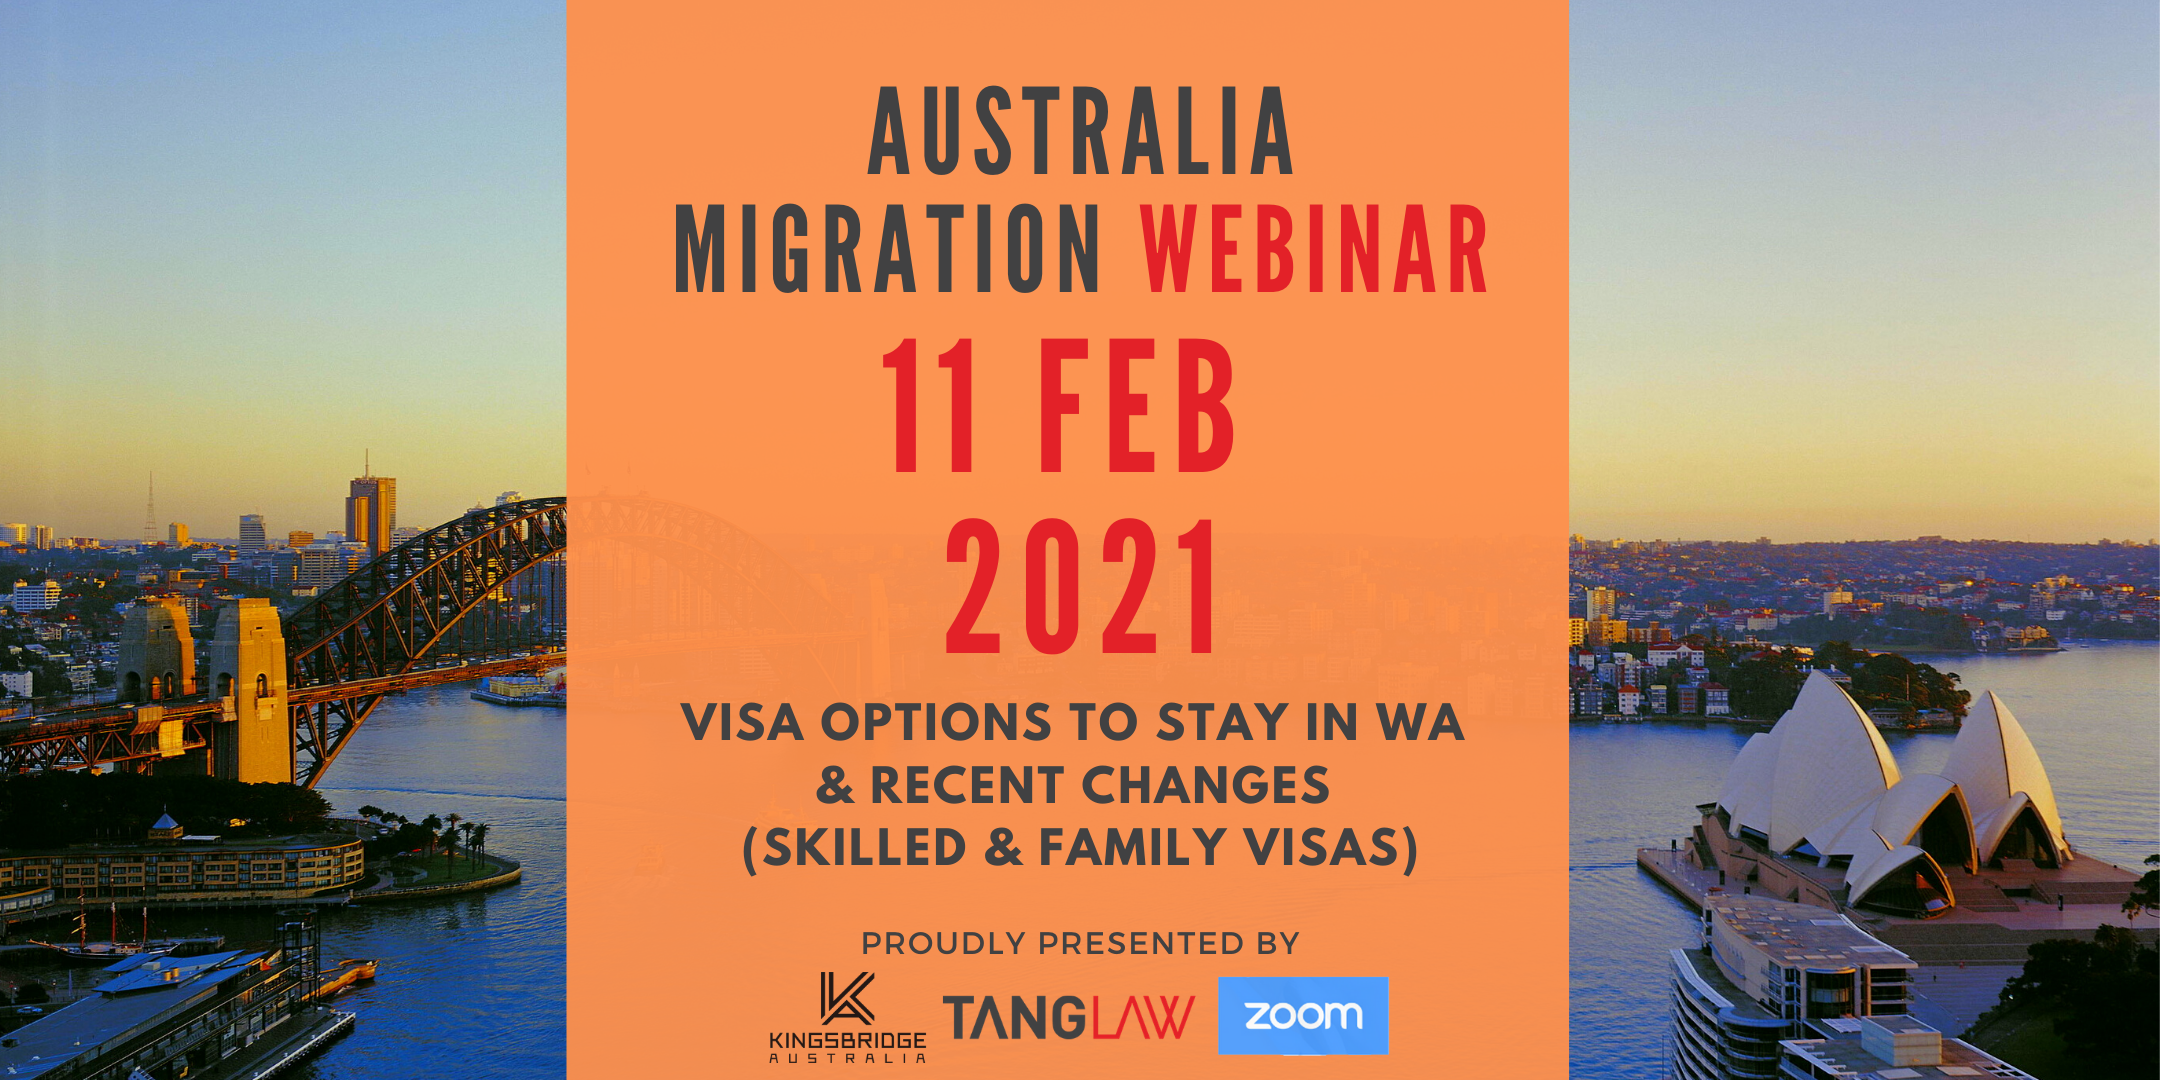 Visa Options to Stay in WA & Recent Changes (Skilled and Family Visas)